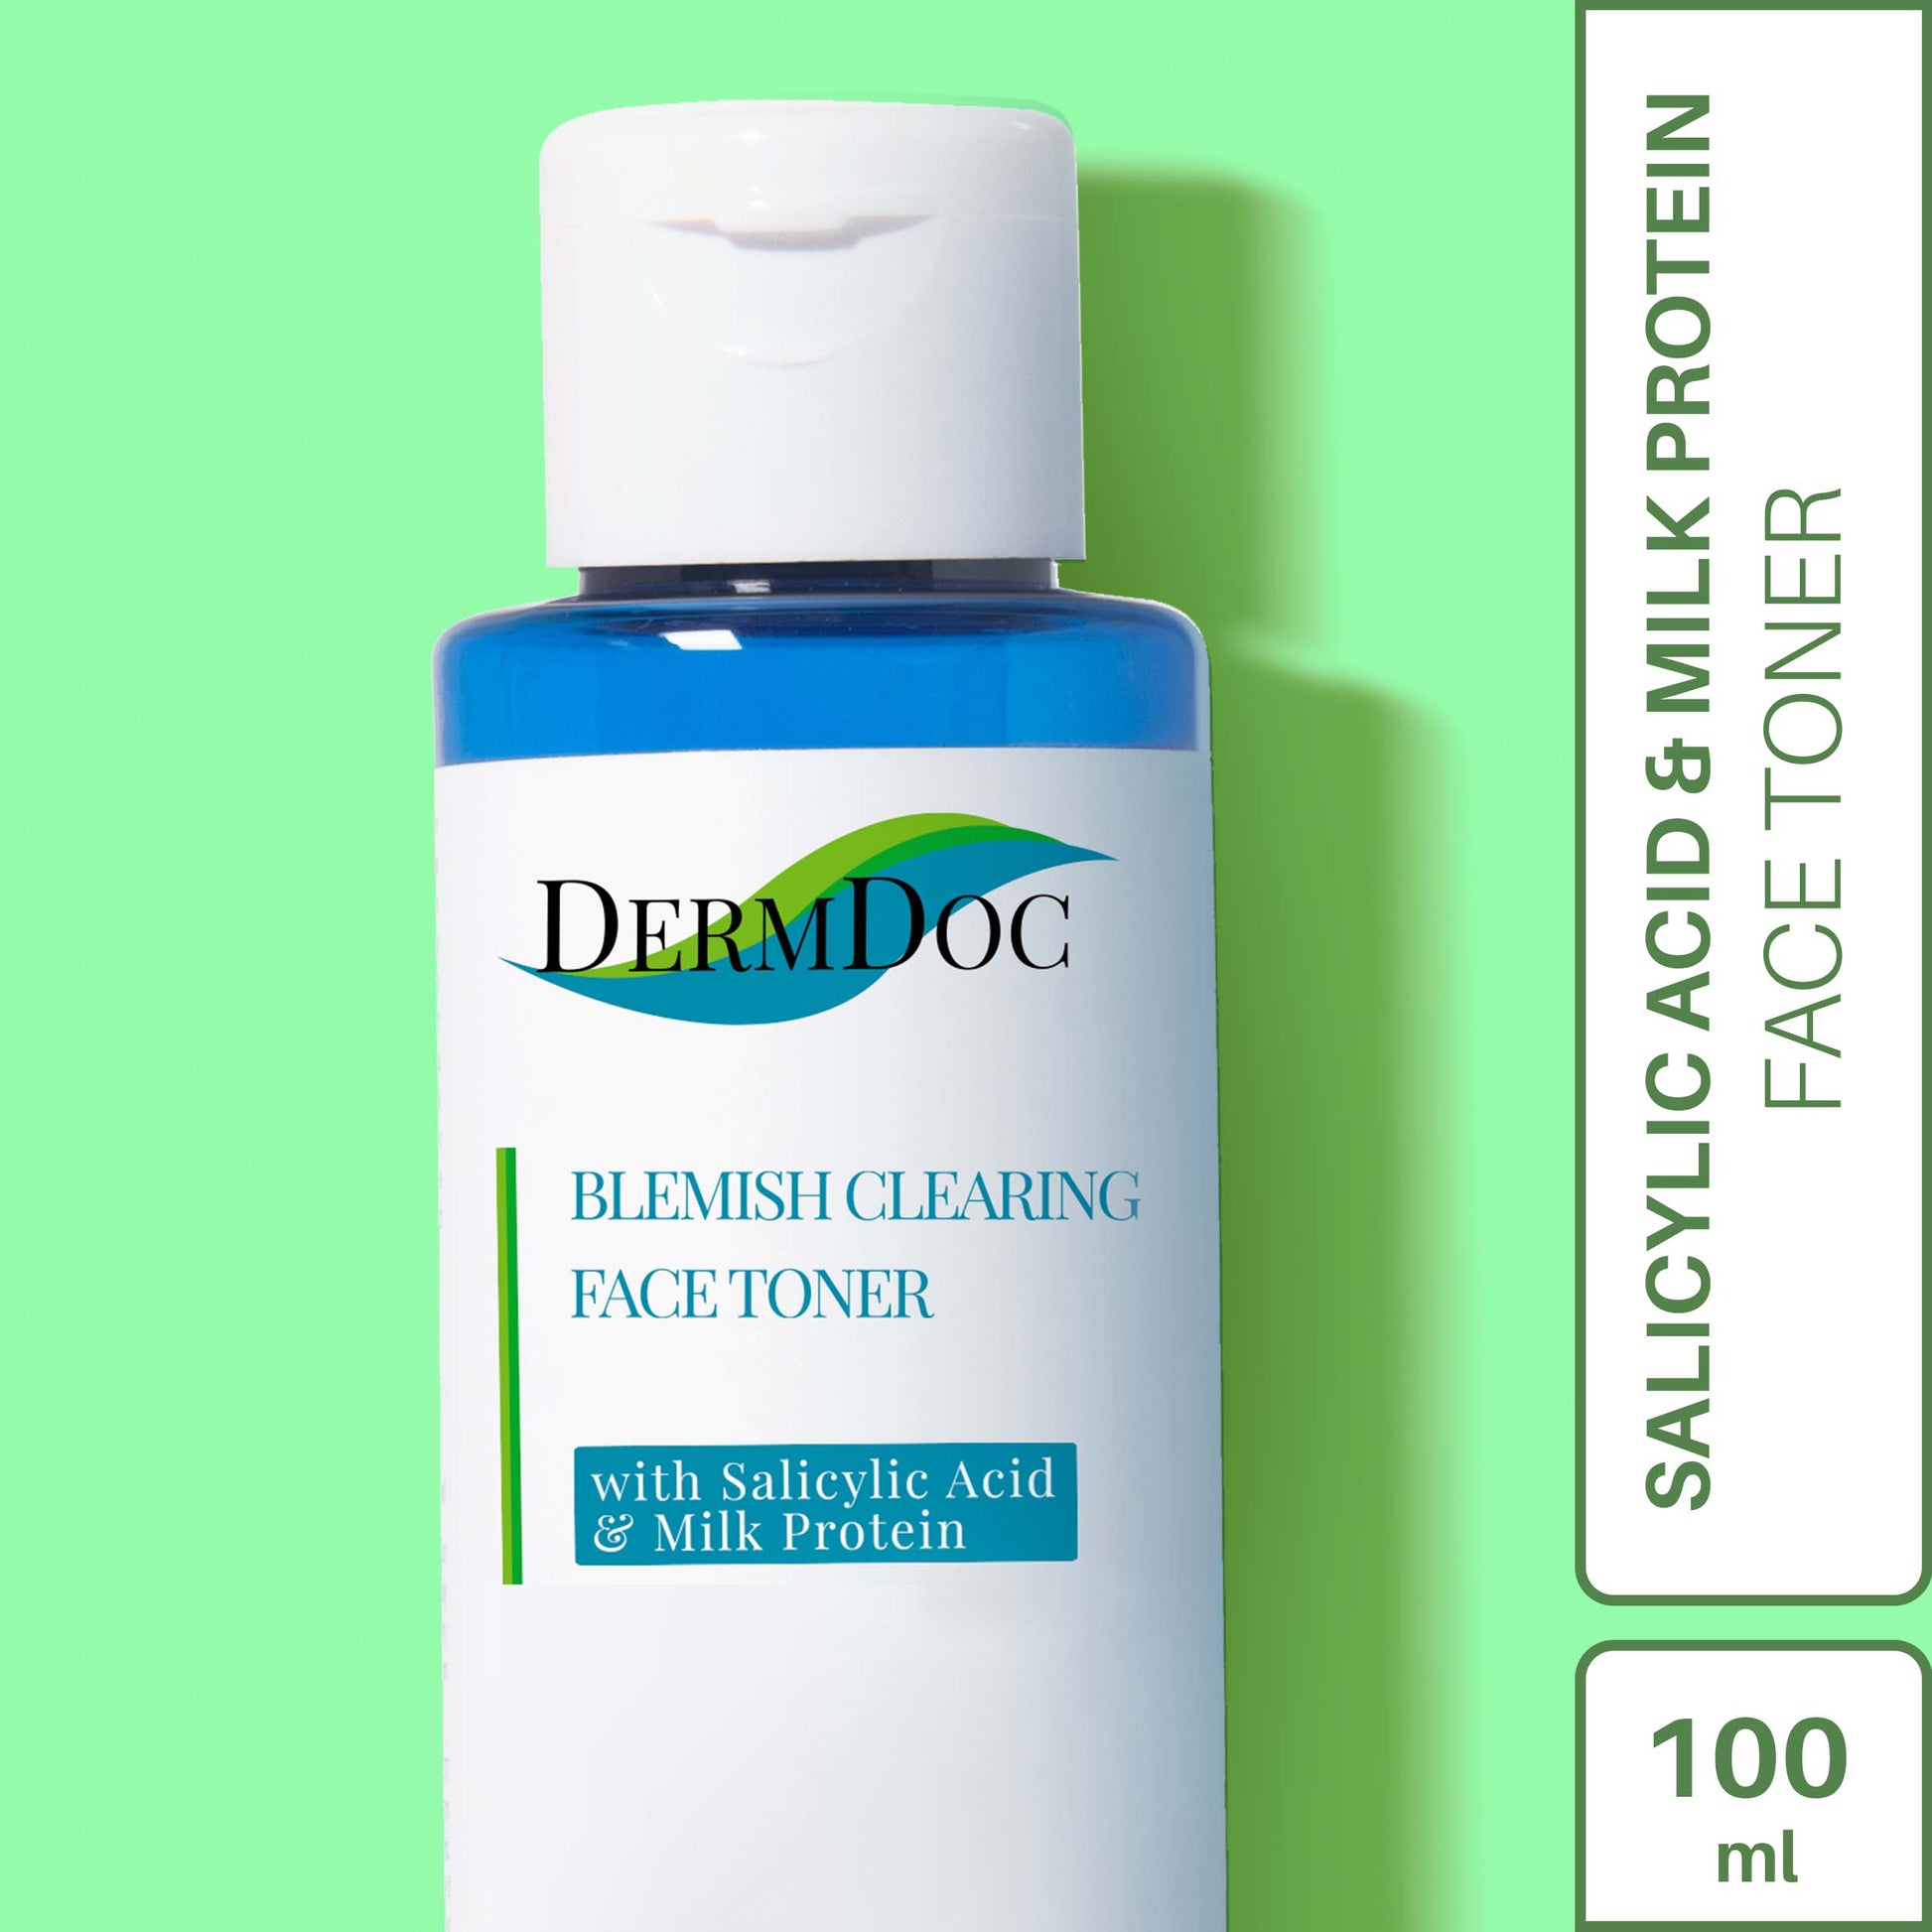 dermdoc-blemish-clearing-face-toner-with-salicylic-acid-and-milk-protein-100-ml-1